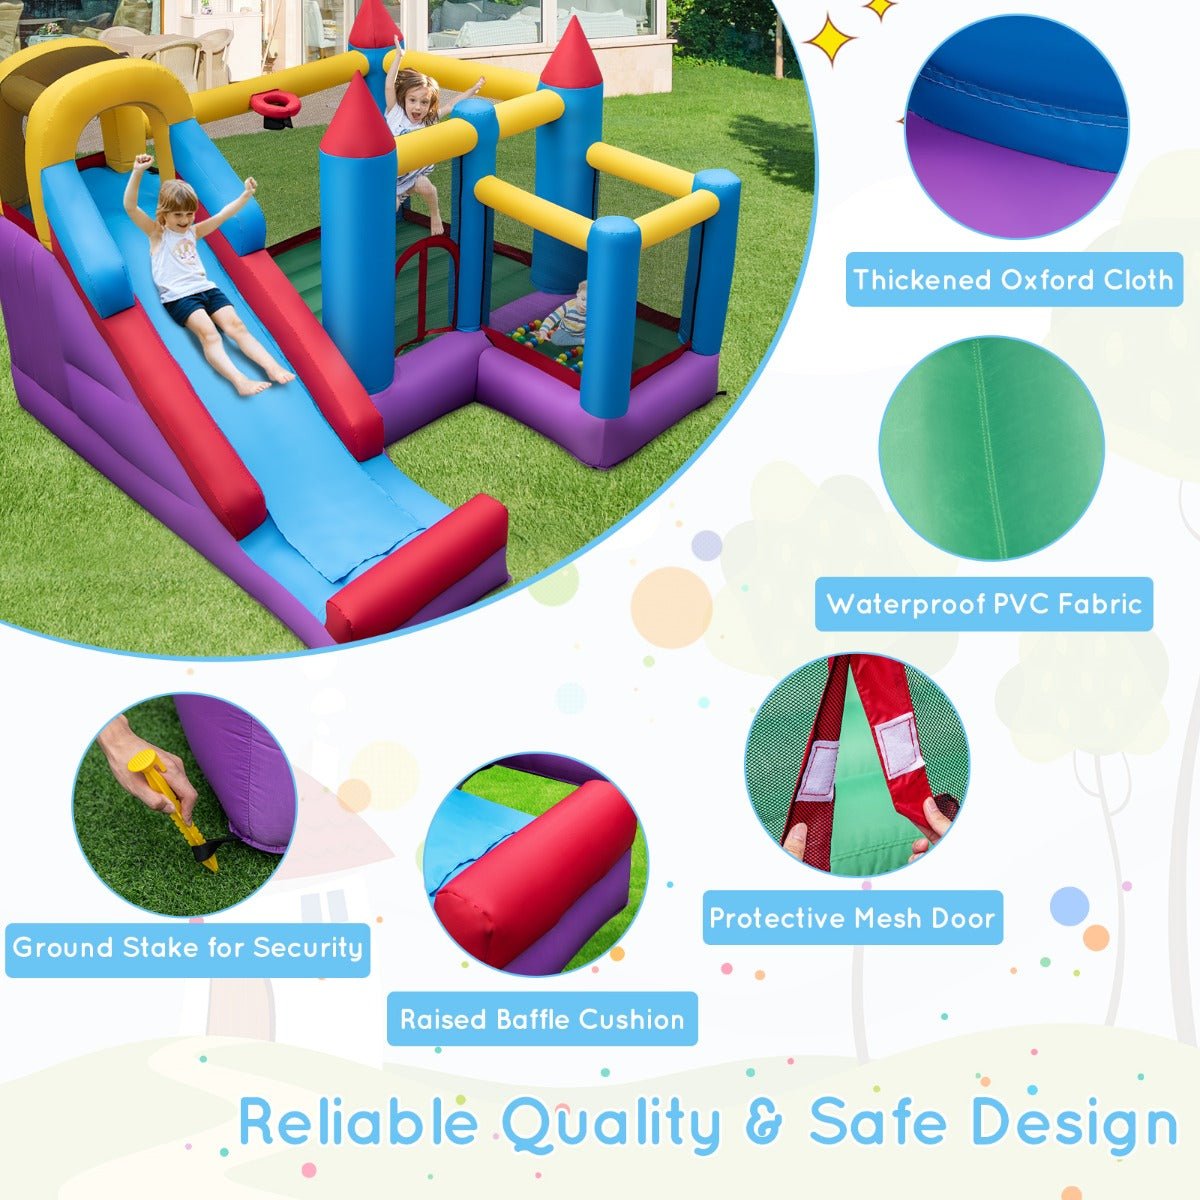 Children's Inflatable Bounce House - Slide, Trampoline & Adventure (With Blower)